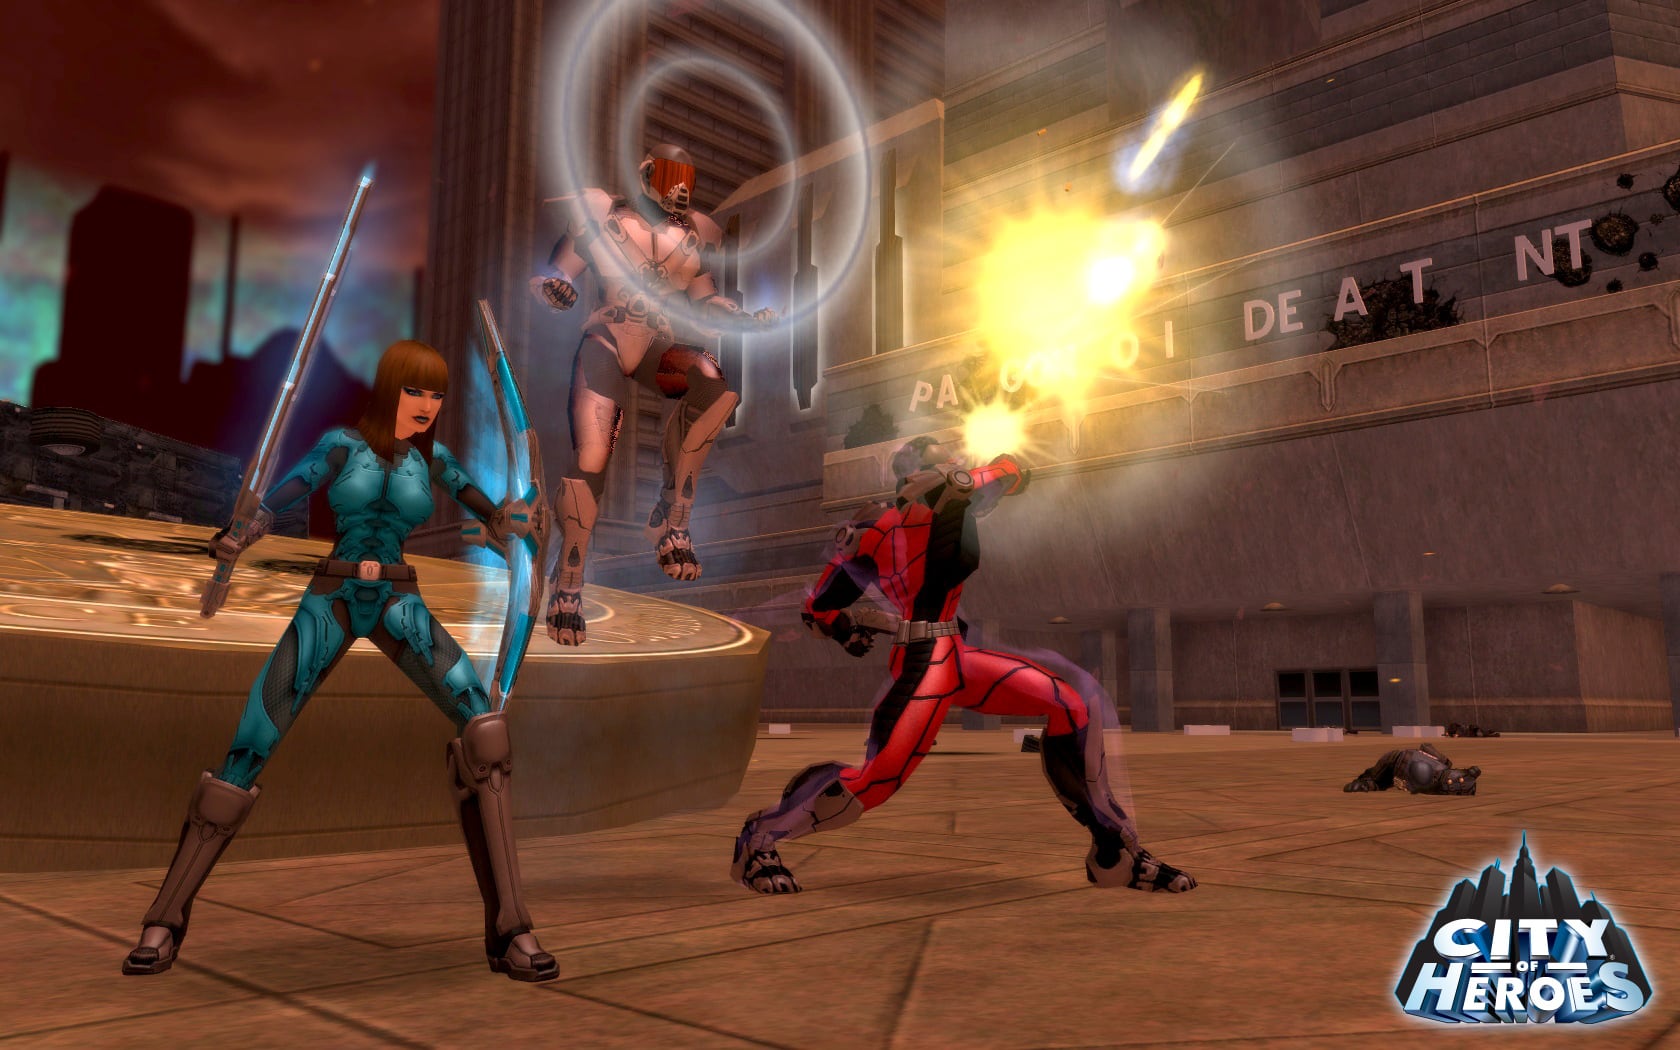 City of heroes freedom download